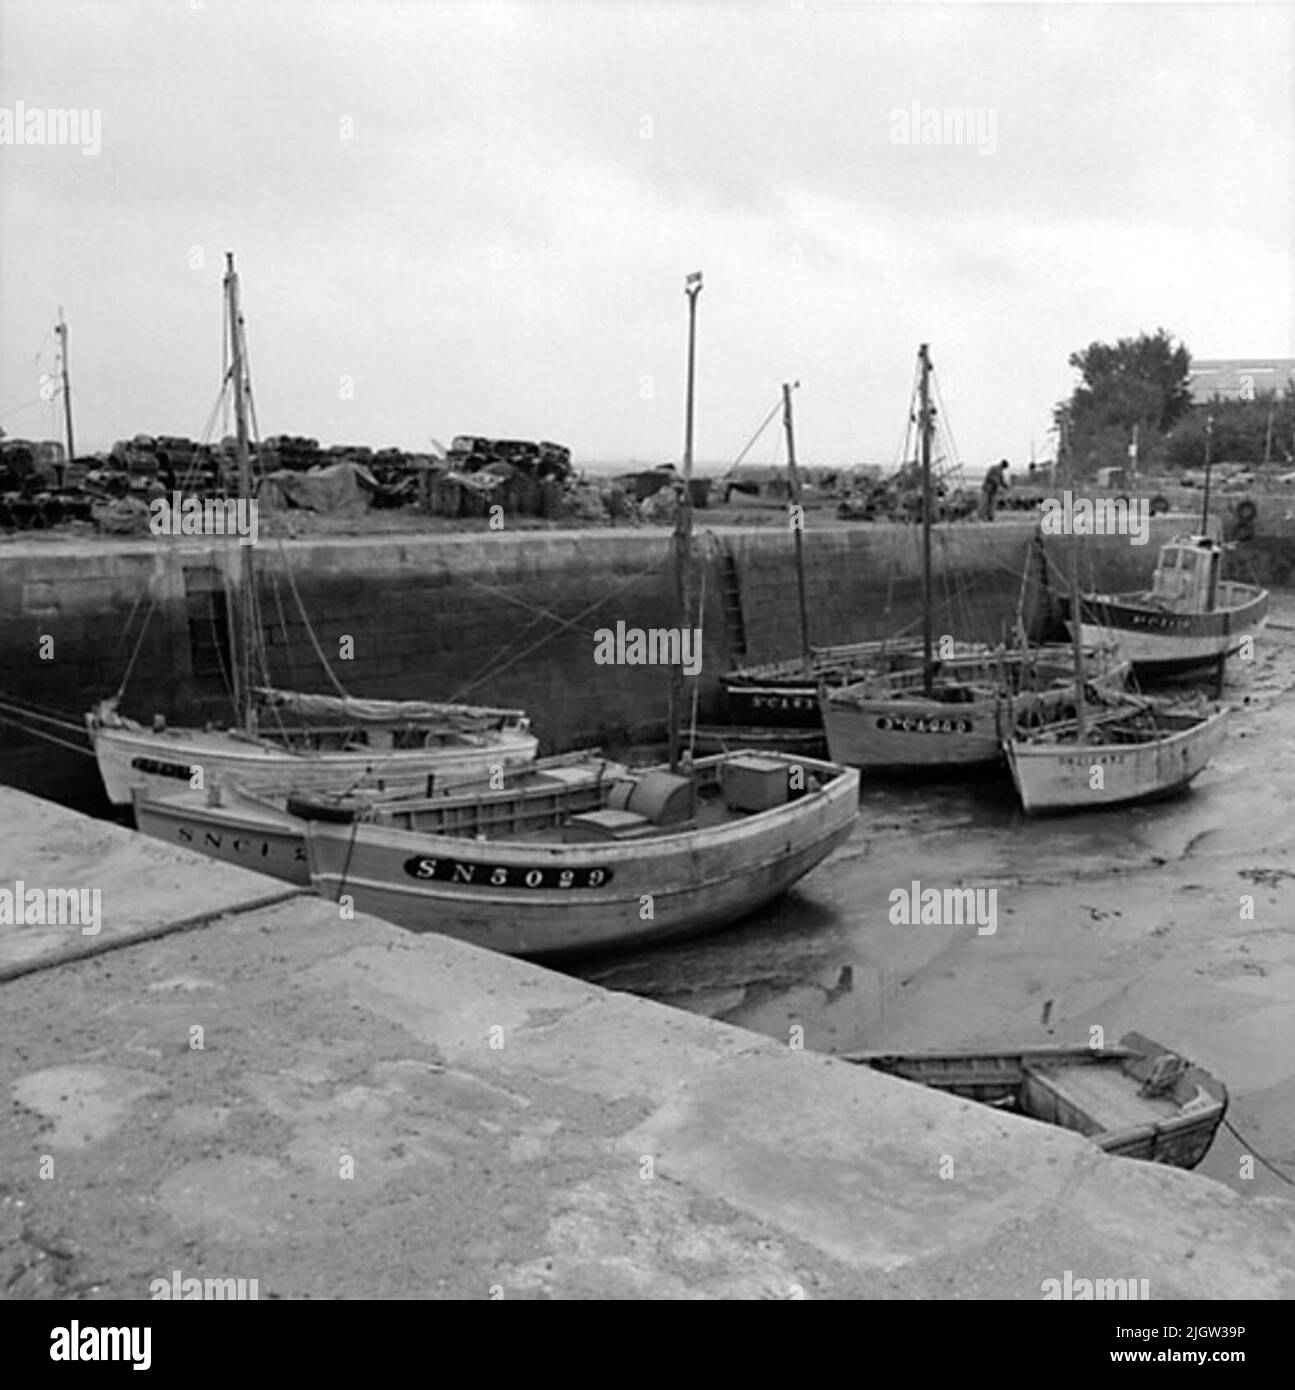 11. France. Photo journal is available at B.M.A. + Photo albums. Acquisition: Books and archive materials. Photos taken 1959-10-17.12 Pictures in series. According to notes: France. Atlantic coast, Le Croisic, 17/10 -59. Boats at EBB in the harbor. A several boats are located in a port in a community. There is low tide, so the boats are at the bottom of the harbor basin. On the quay are a number of fishing gear. Stock Photo